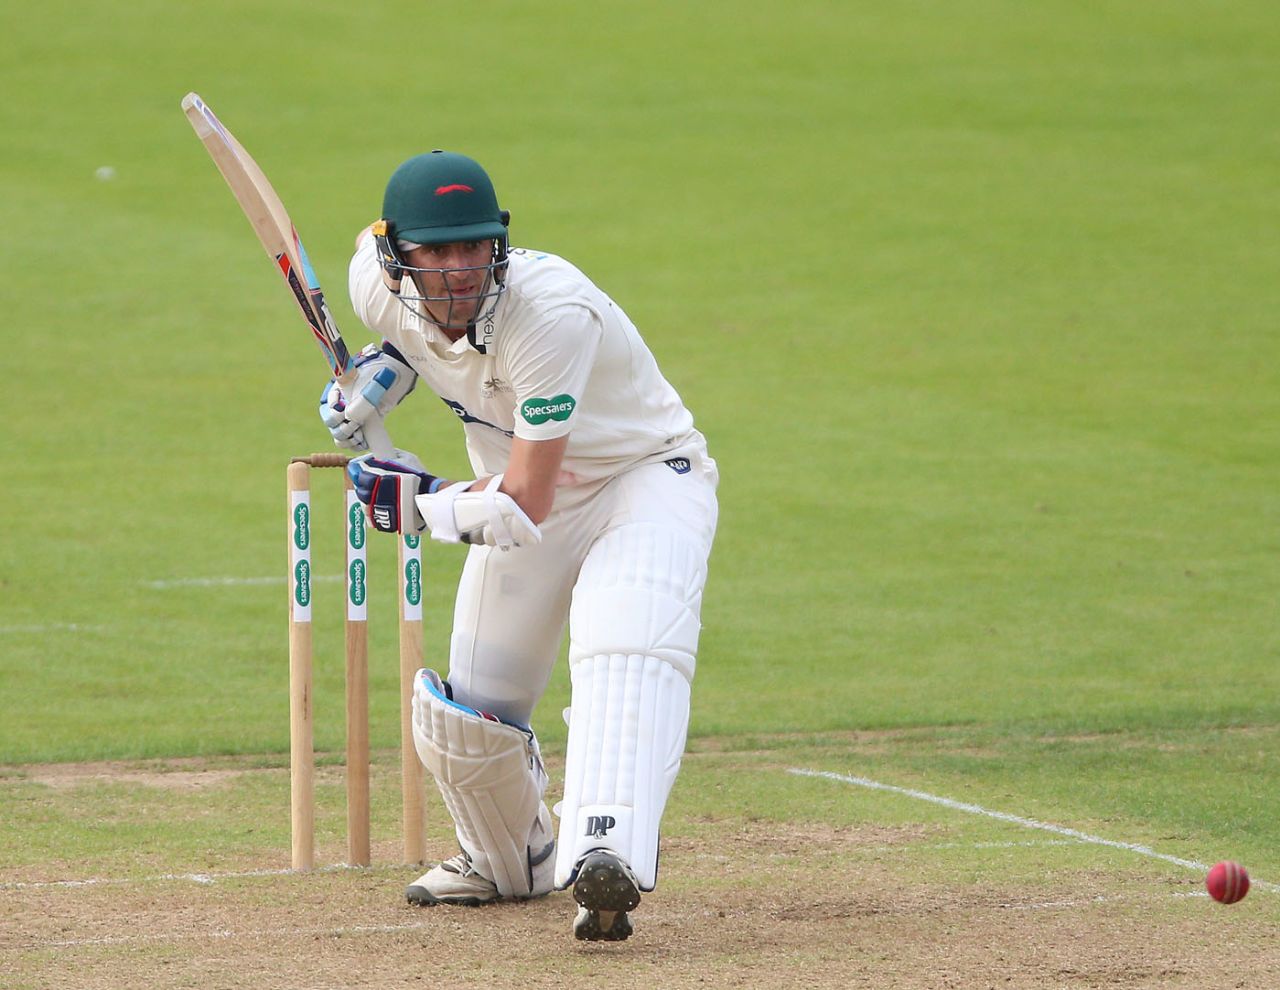 Colin Ackermann in action, Northants v Leicestershire, Specsavers Championship Division Two, June 9, 2018